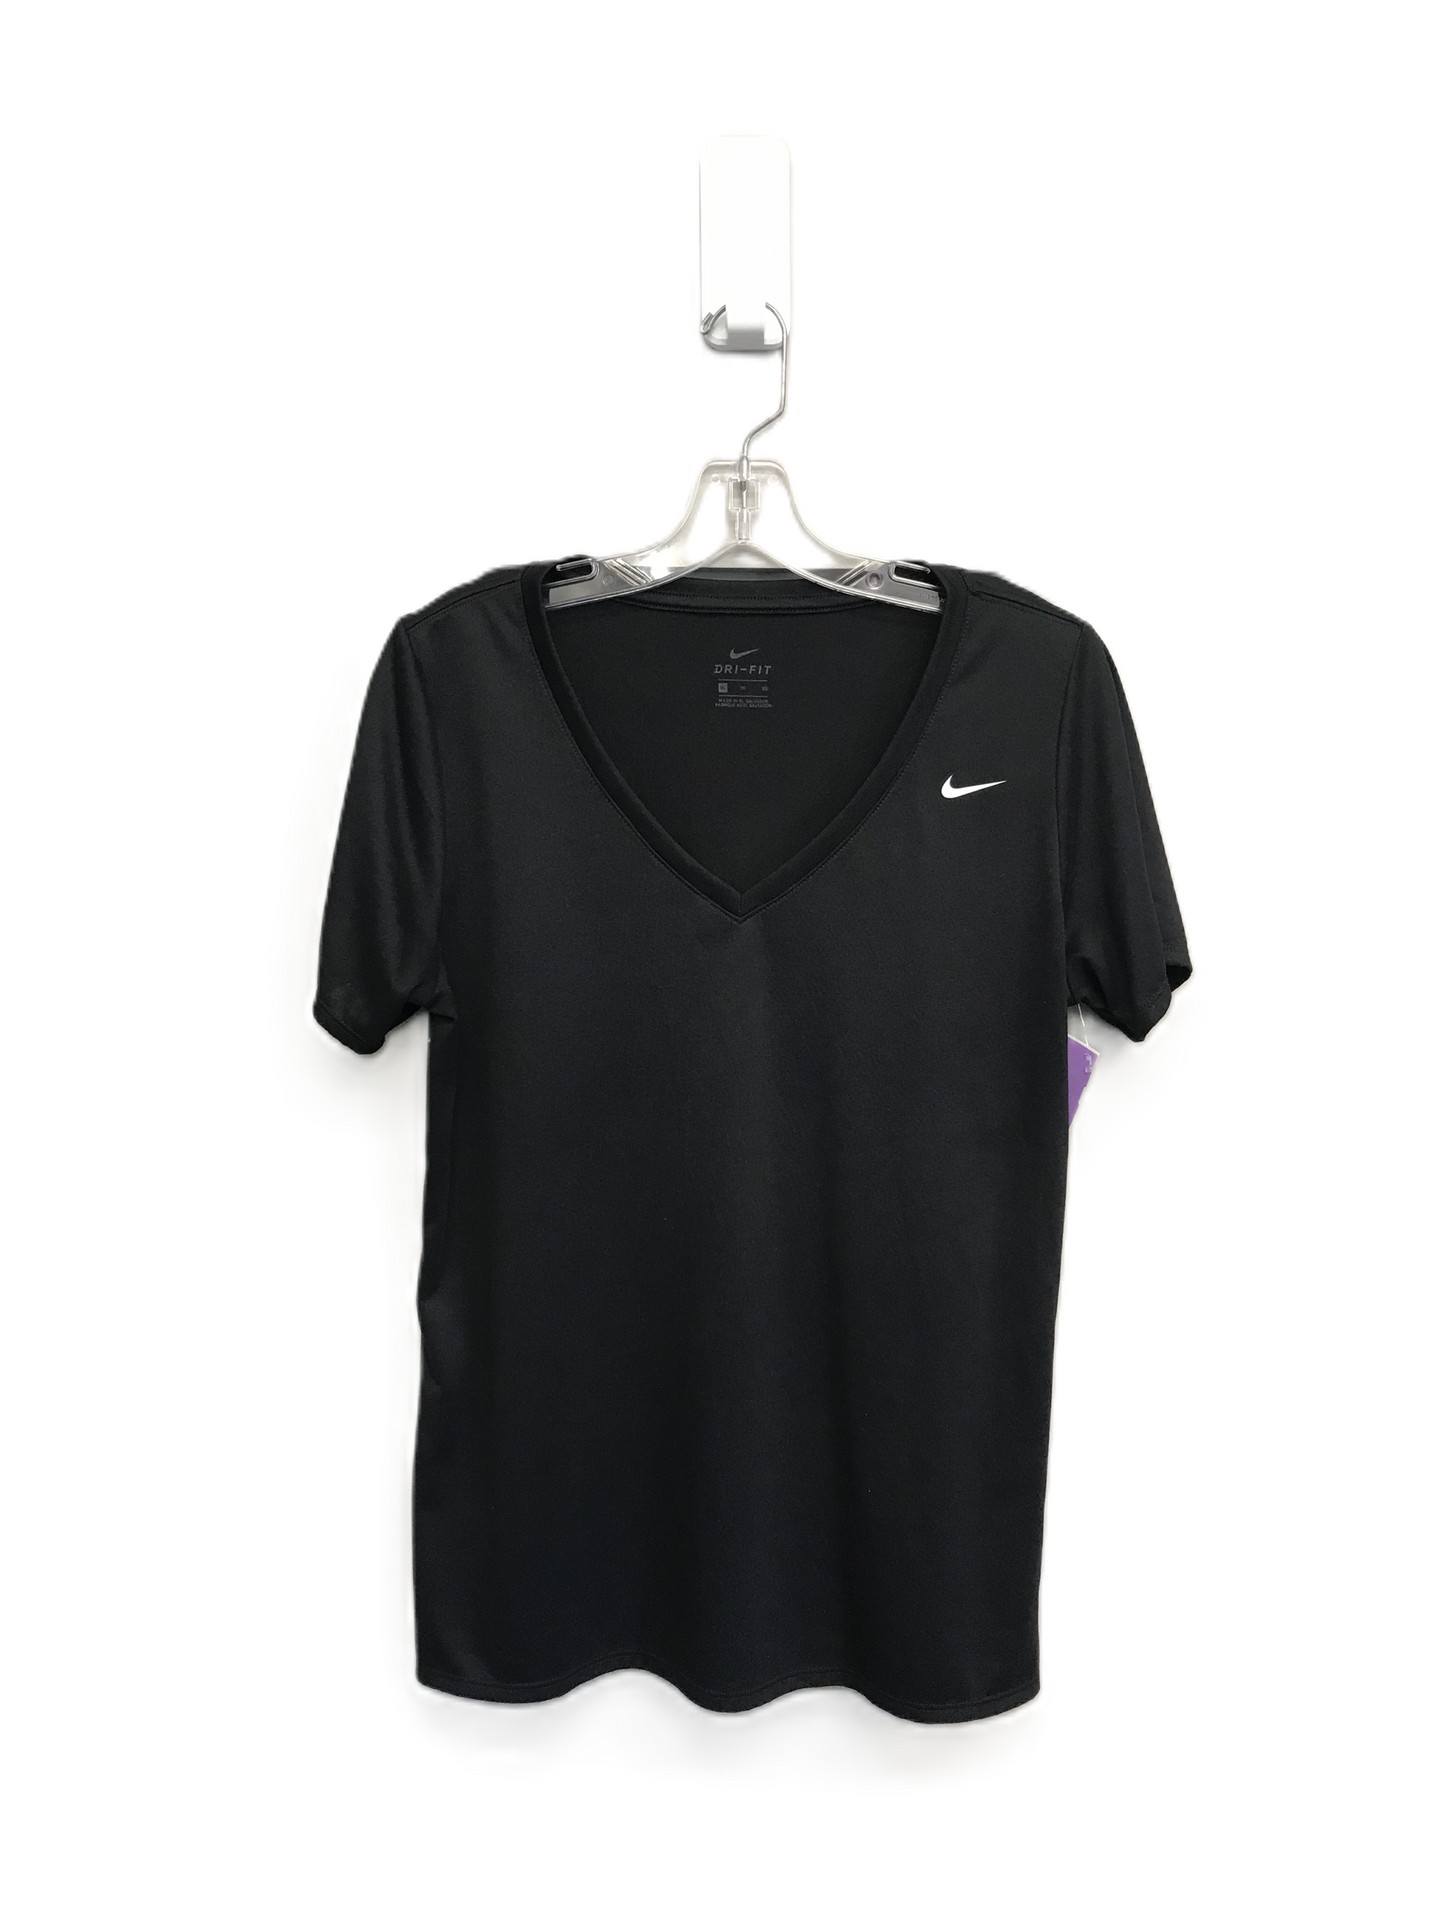 Black Athletic Top Short Sleeve By Nike Apparel, Size: Xl